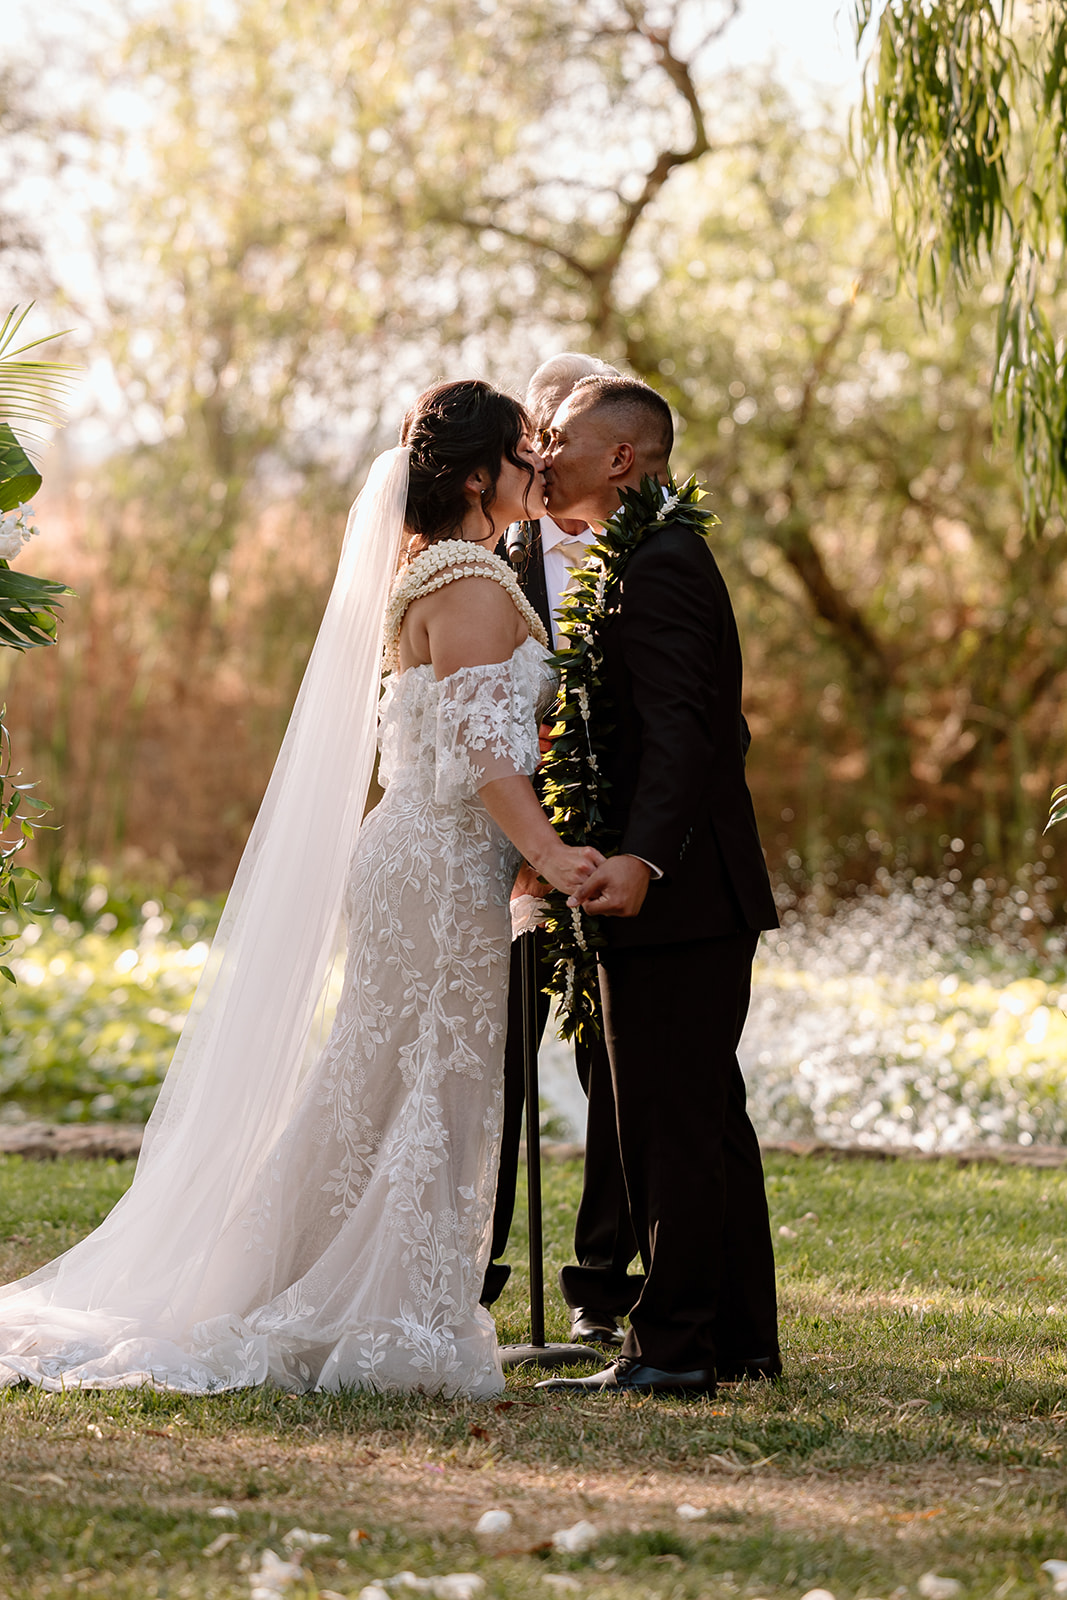 candid first kiss image of wedding couple on wedding day at galway downs temecula california